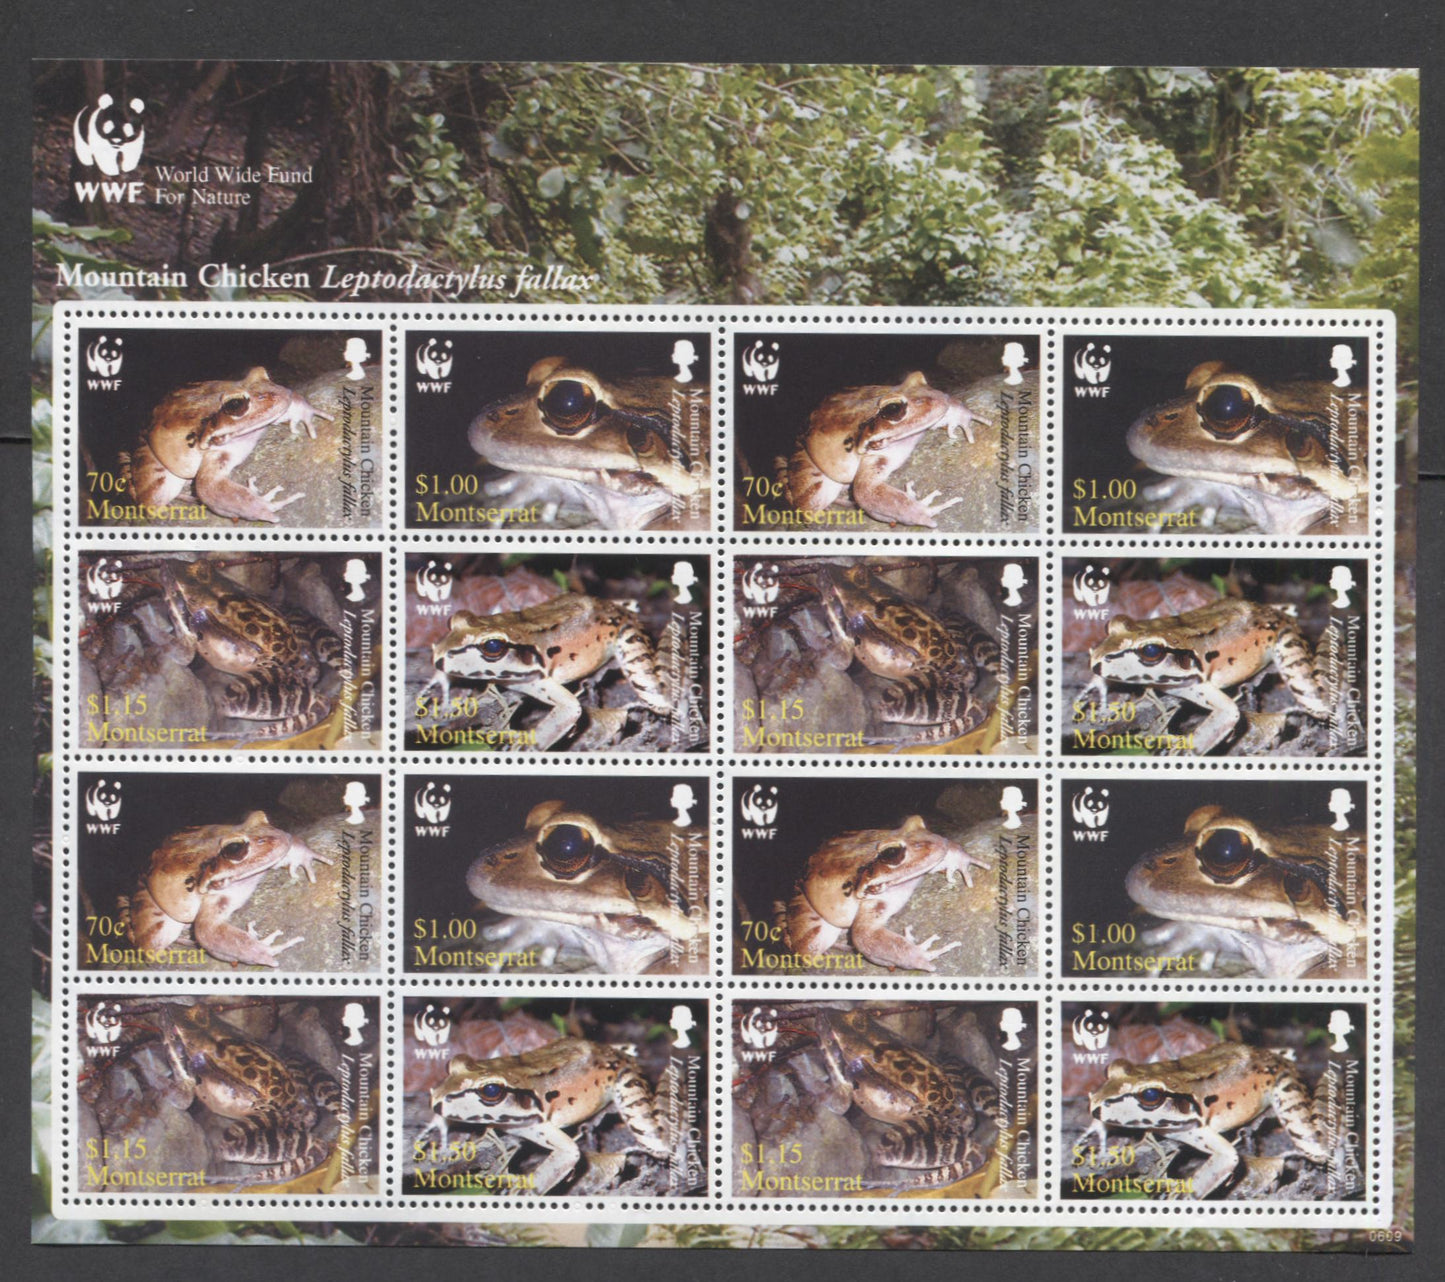 Lot 102 Montserrat SC#1159e 70c-$1.50 Multicolored 2006 WWF Nature Issue, A VFNH Sheet Of 16, Click on Listing to See ALL Pictures, 2017 Scott Cat. $15